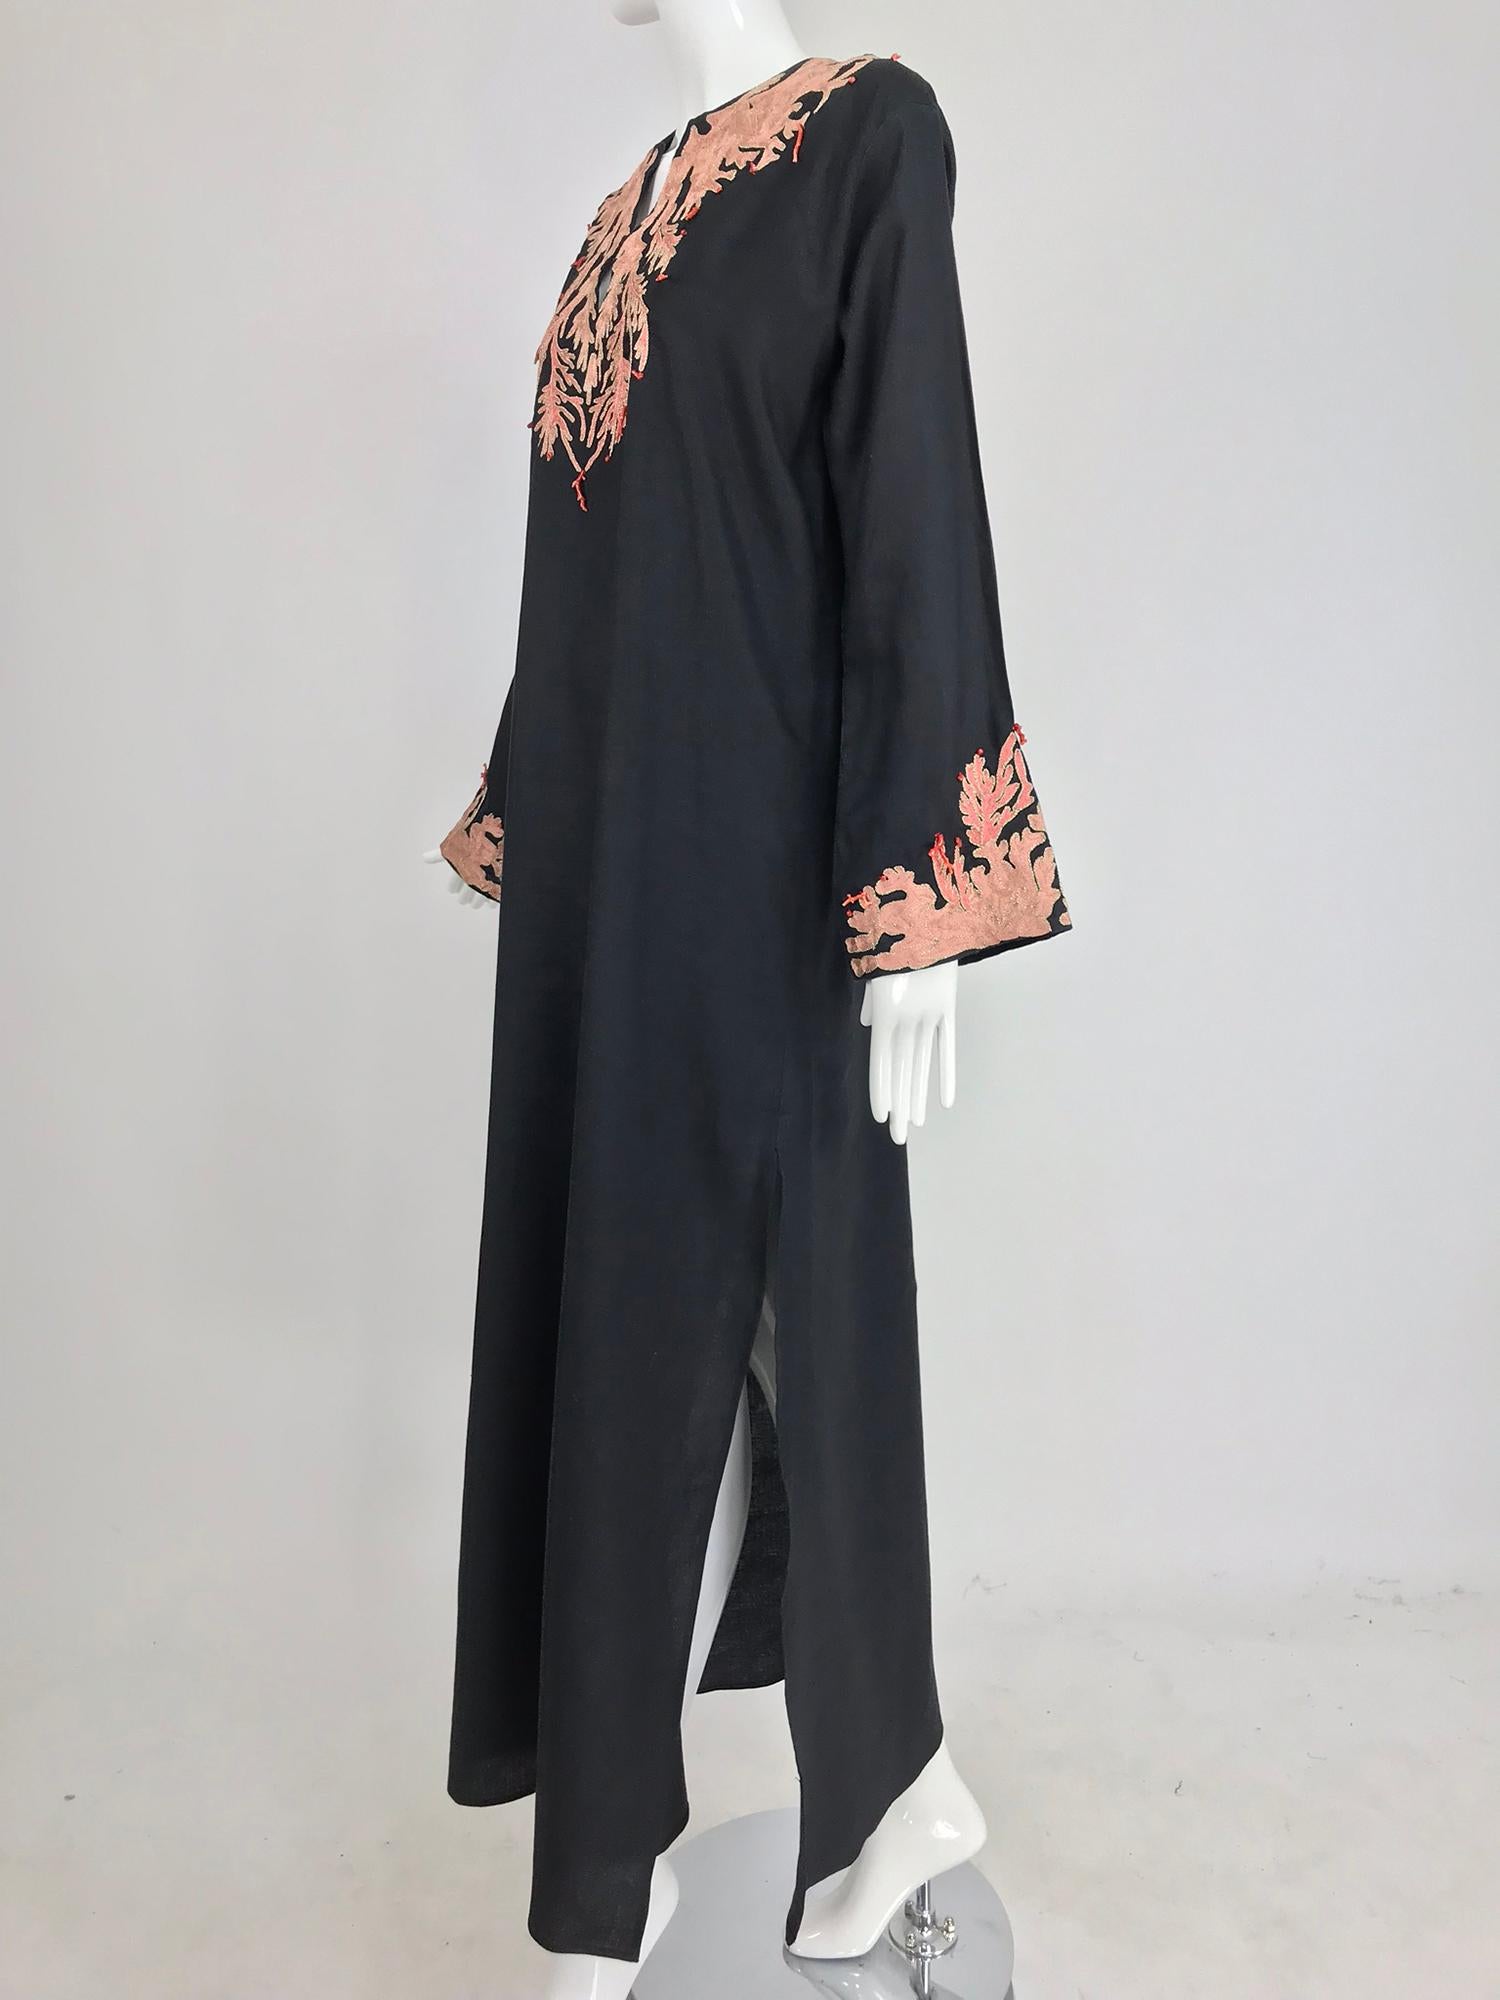 Jeannie McQueeny coral embroidered black linen caftan  5